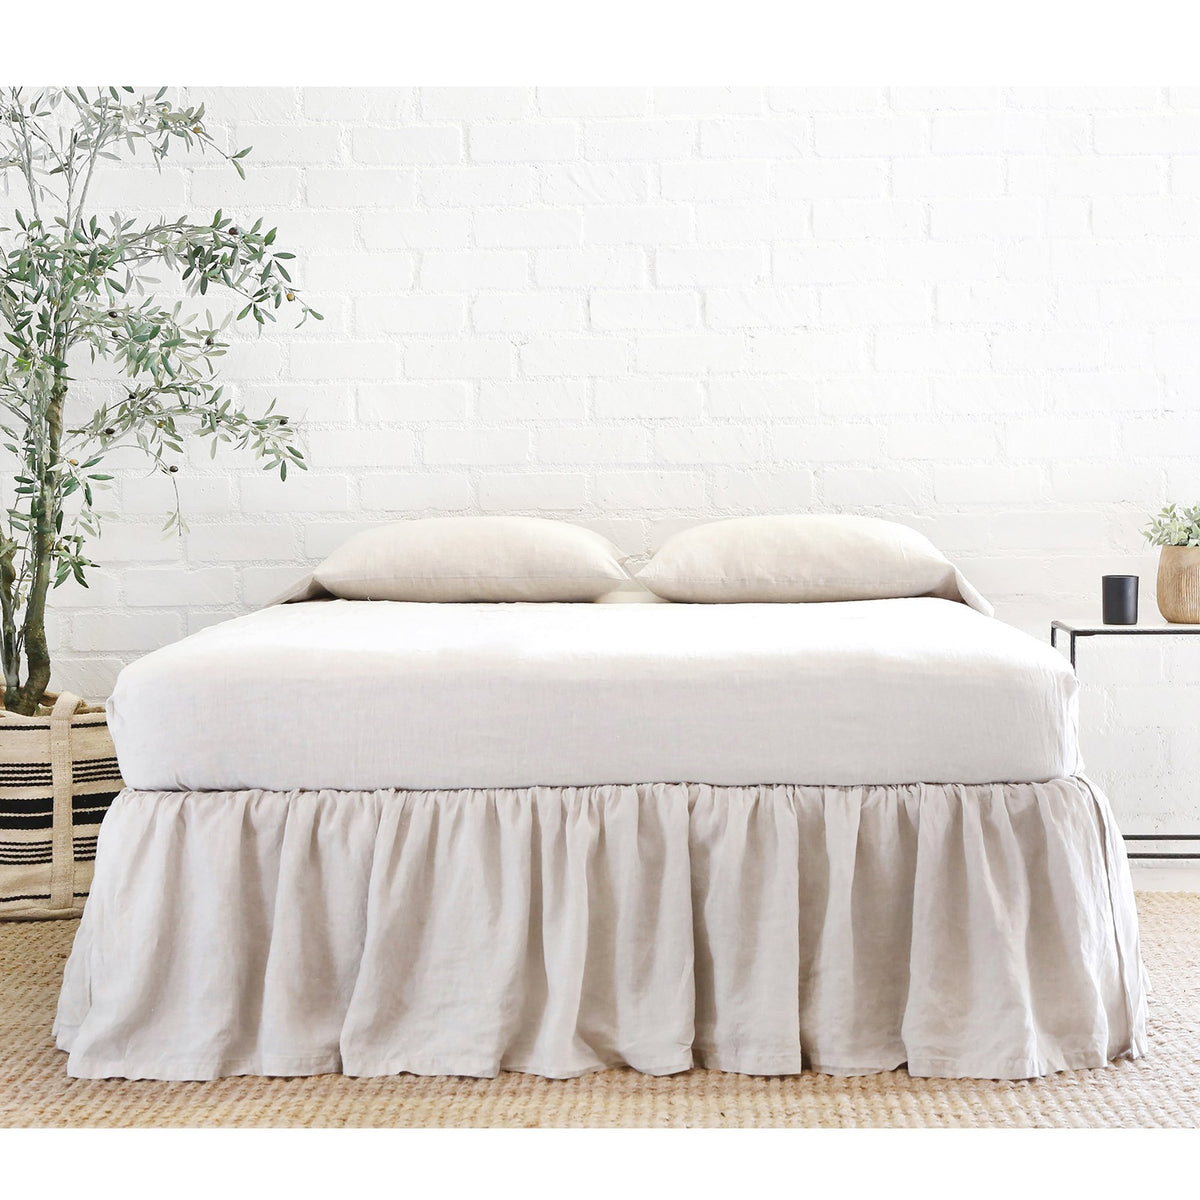 Pom Pom at Home - Flax Linen Gathered Bed Skirt | Fig Linens